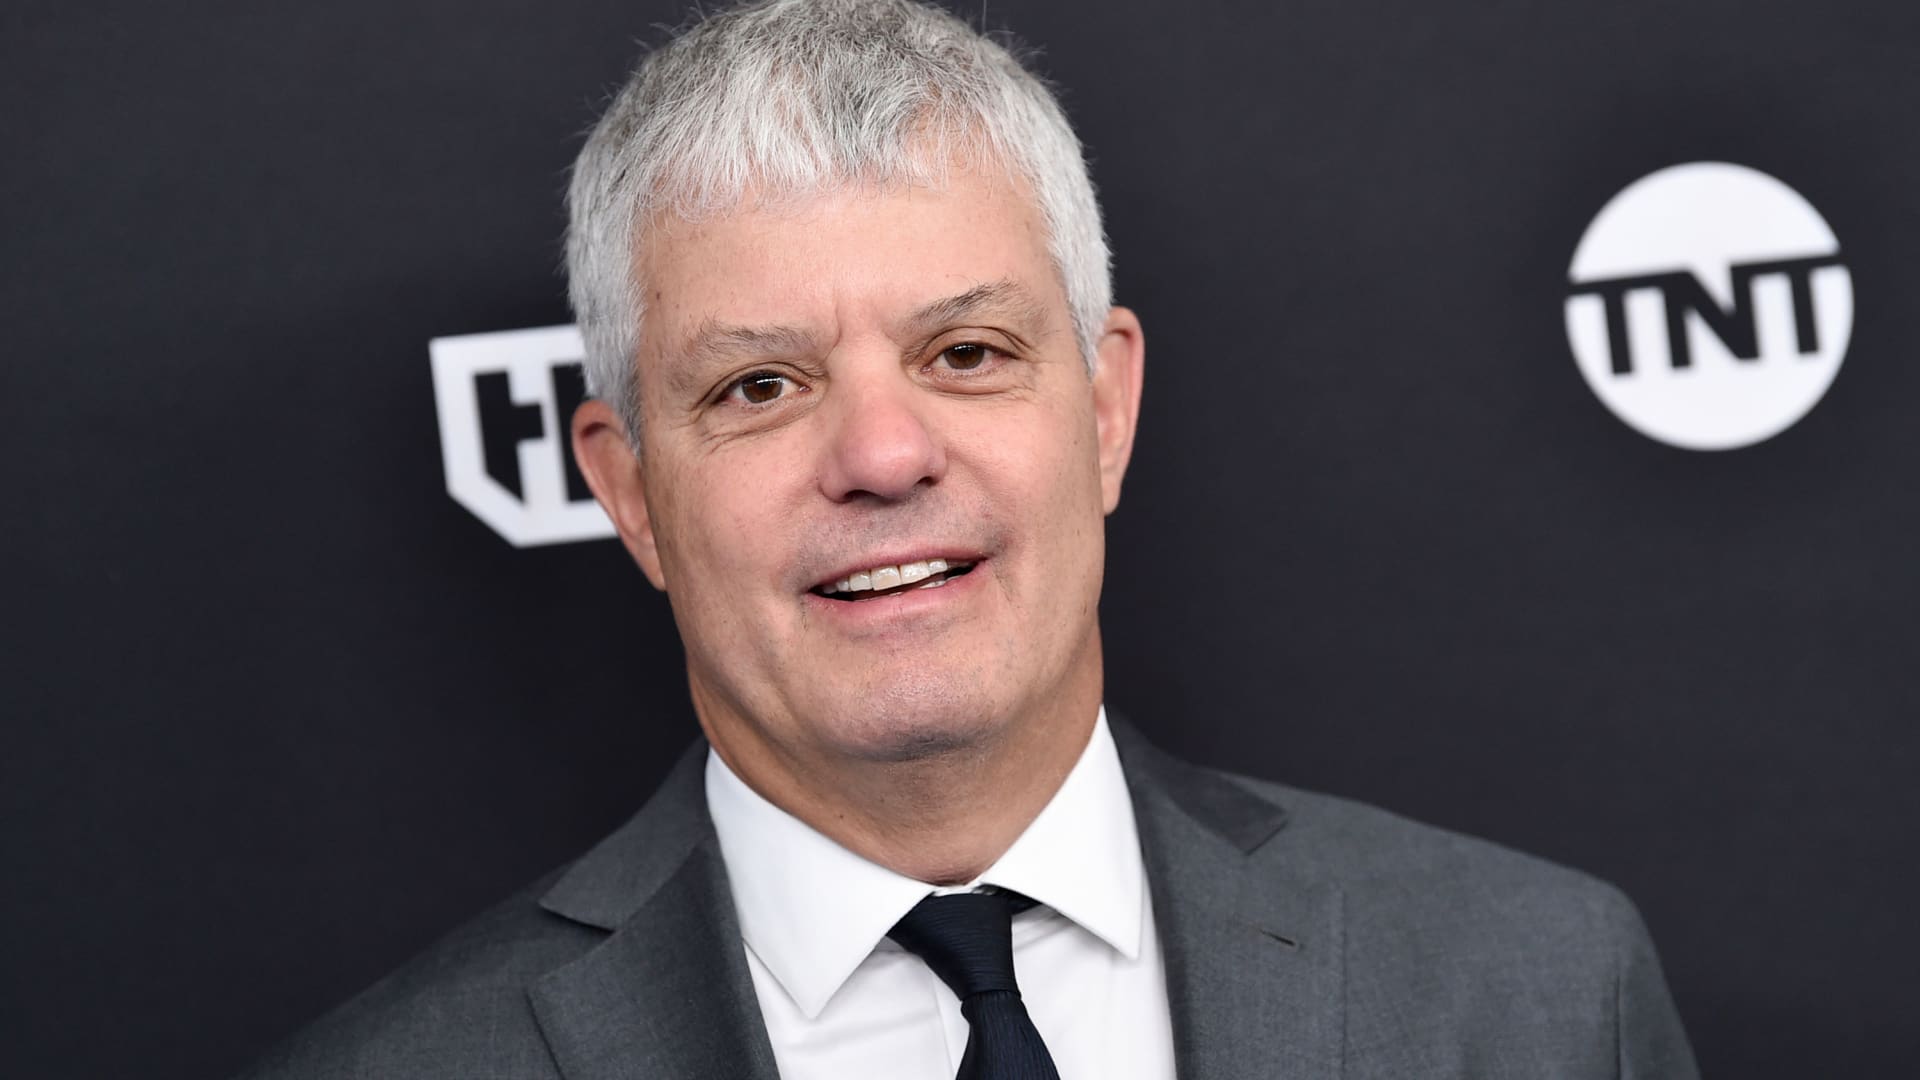 This is a May 16, 2018, file photo showing then-Turner Broadcasting President David Levy attending the Turner Networks 2018 Upfront in New York.